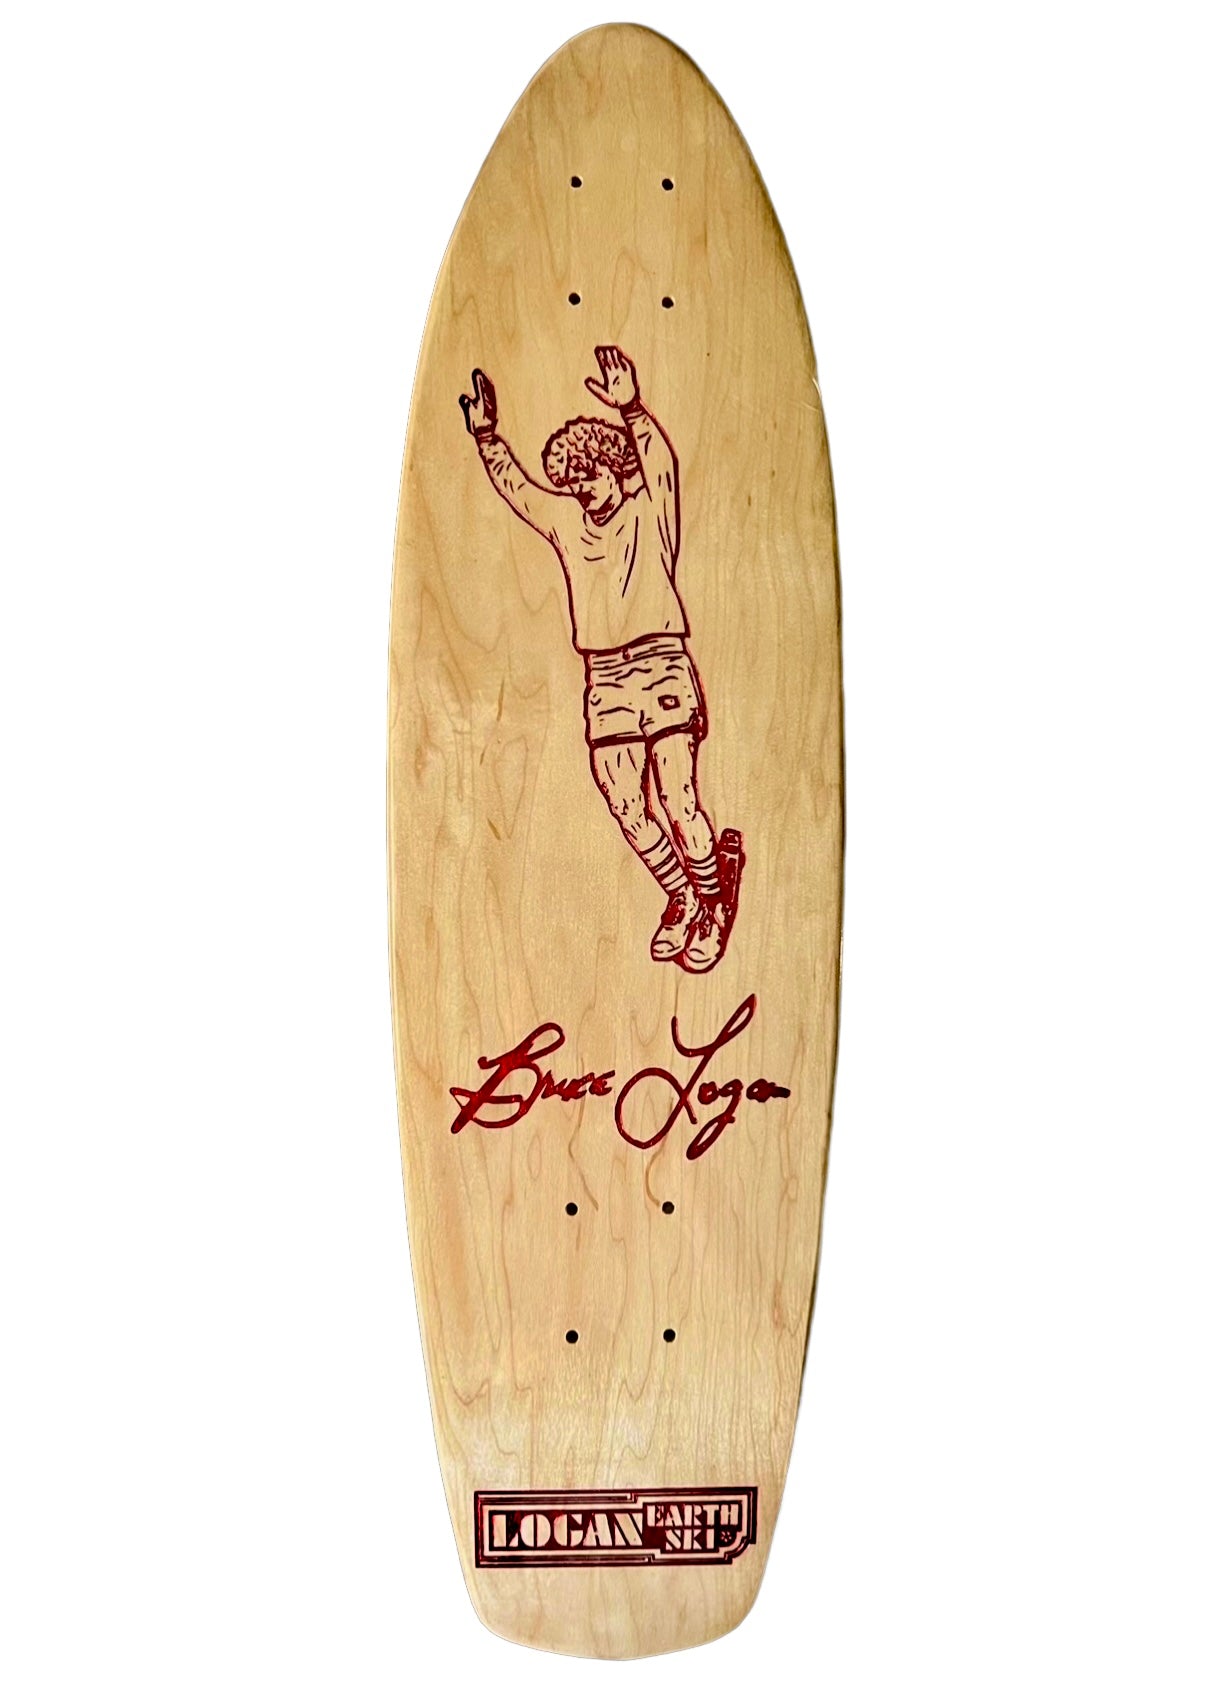 Limited Edition Bruce Logan Tribute Deck (Pre-Order)